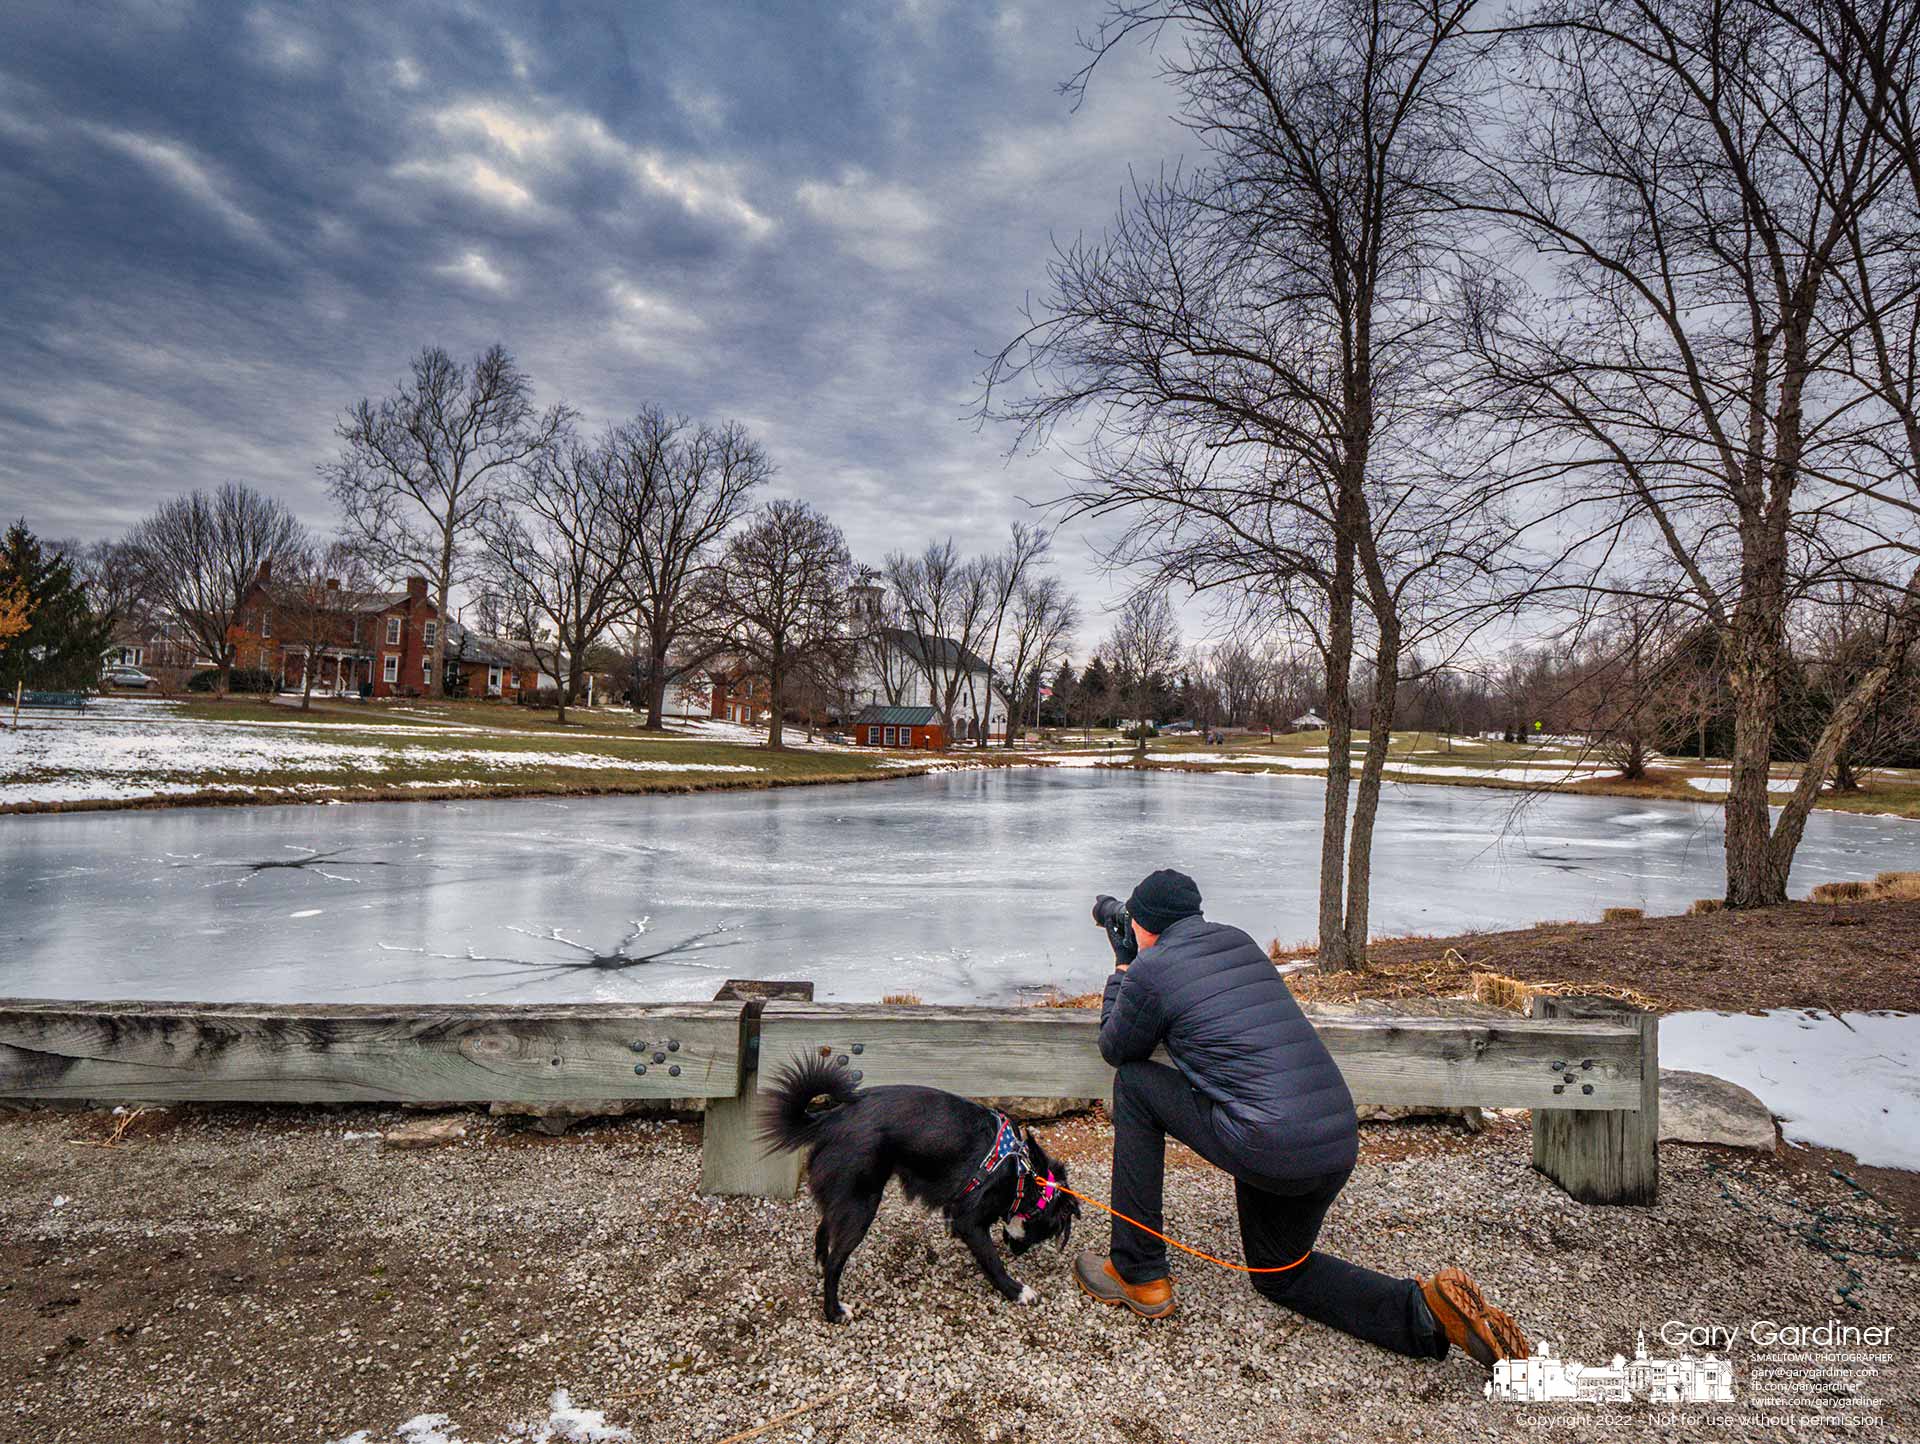 A photographer kneels for a better perspective on the frozen pond that accentuates the old farm buildings at Heritage Park in Westerville. My Final Photo for Jan. 22, 2022.